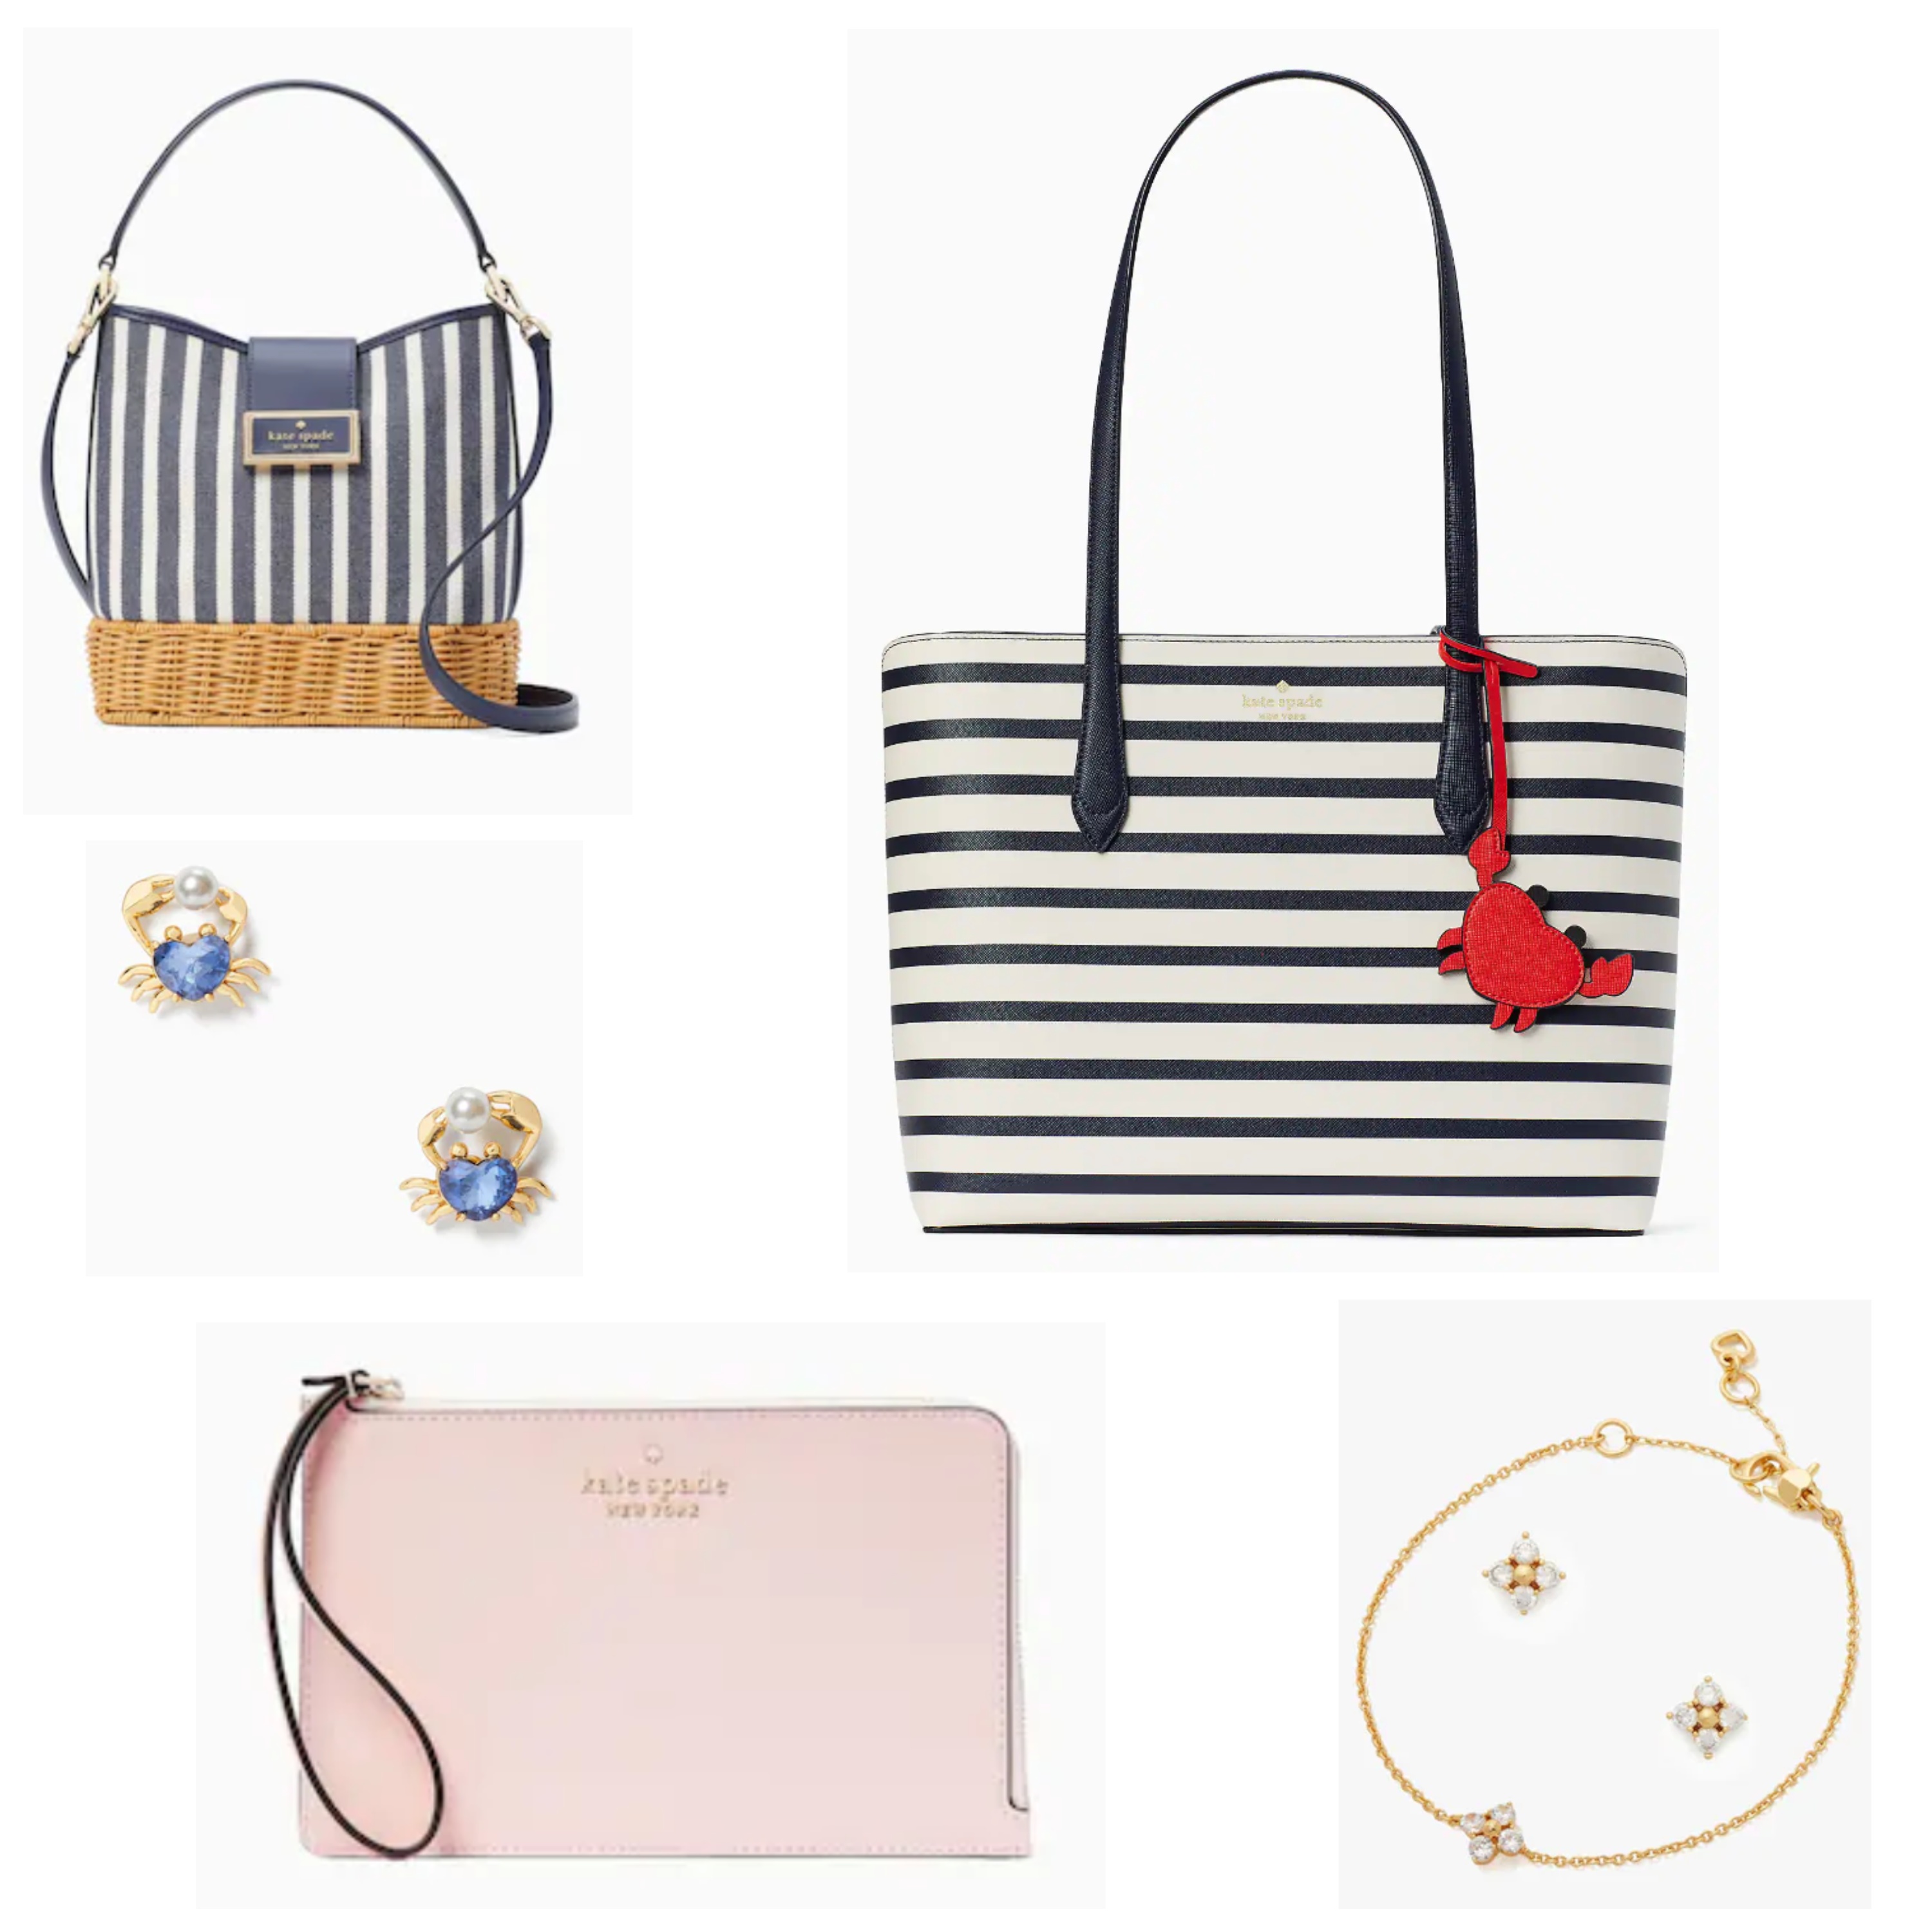 Update your closet: Kate Spade is having a surprise 75% off sale